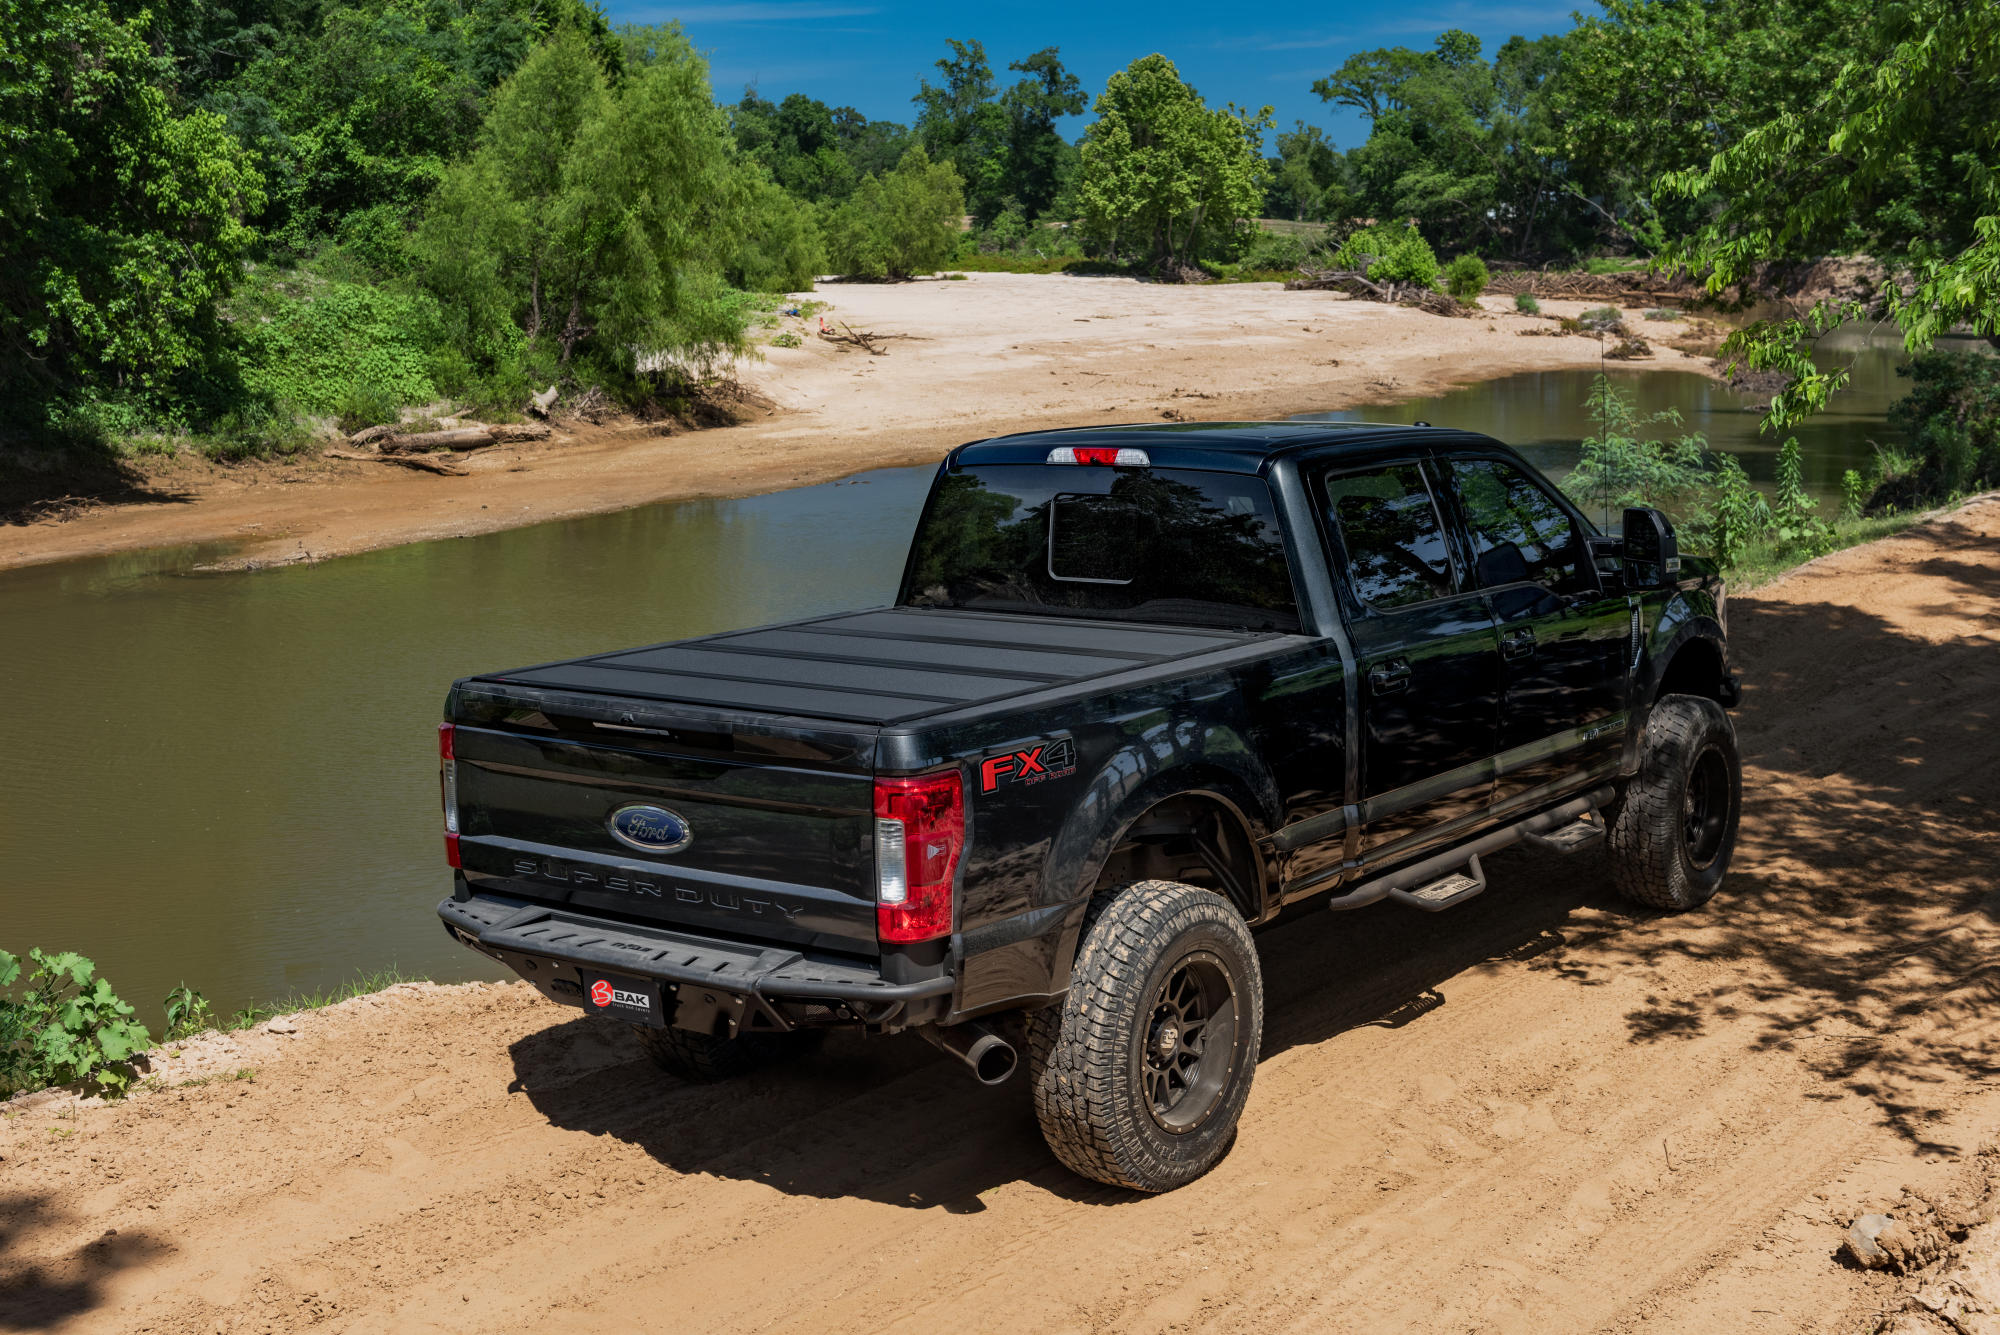 BAKFlip MX4 tonneau cover on a Ford F-150